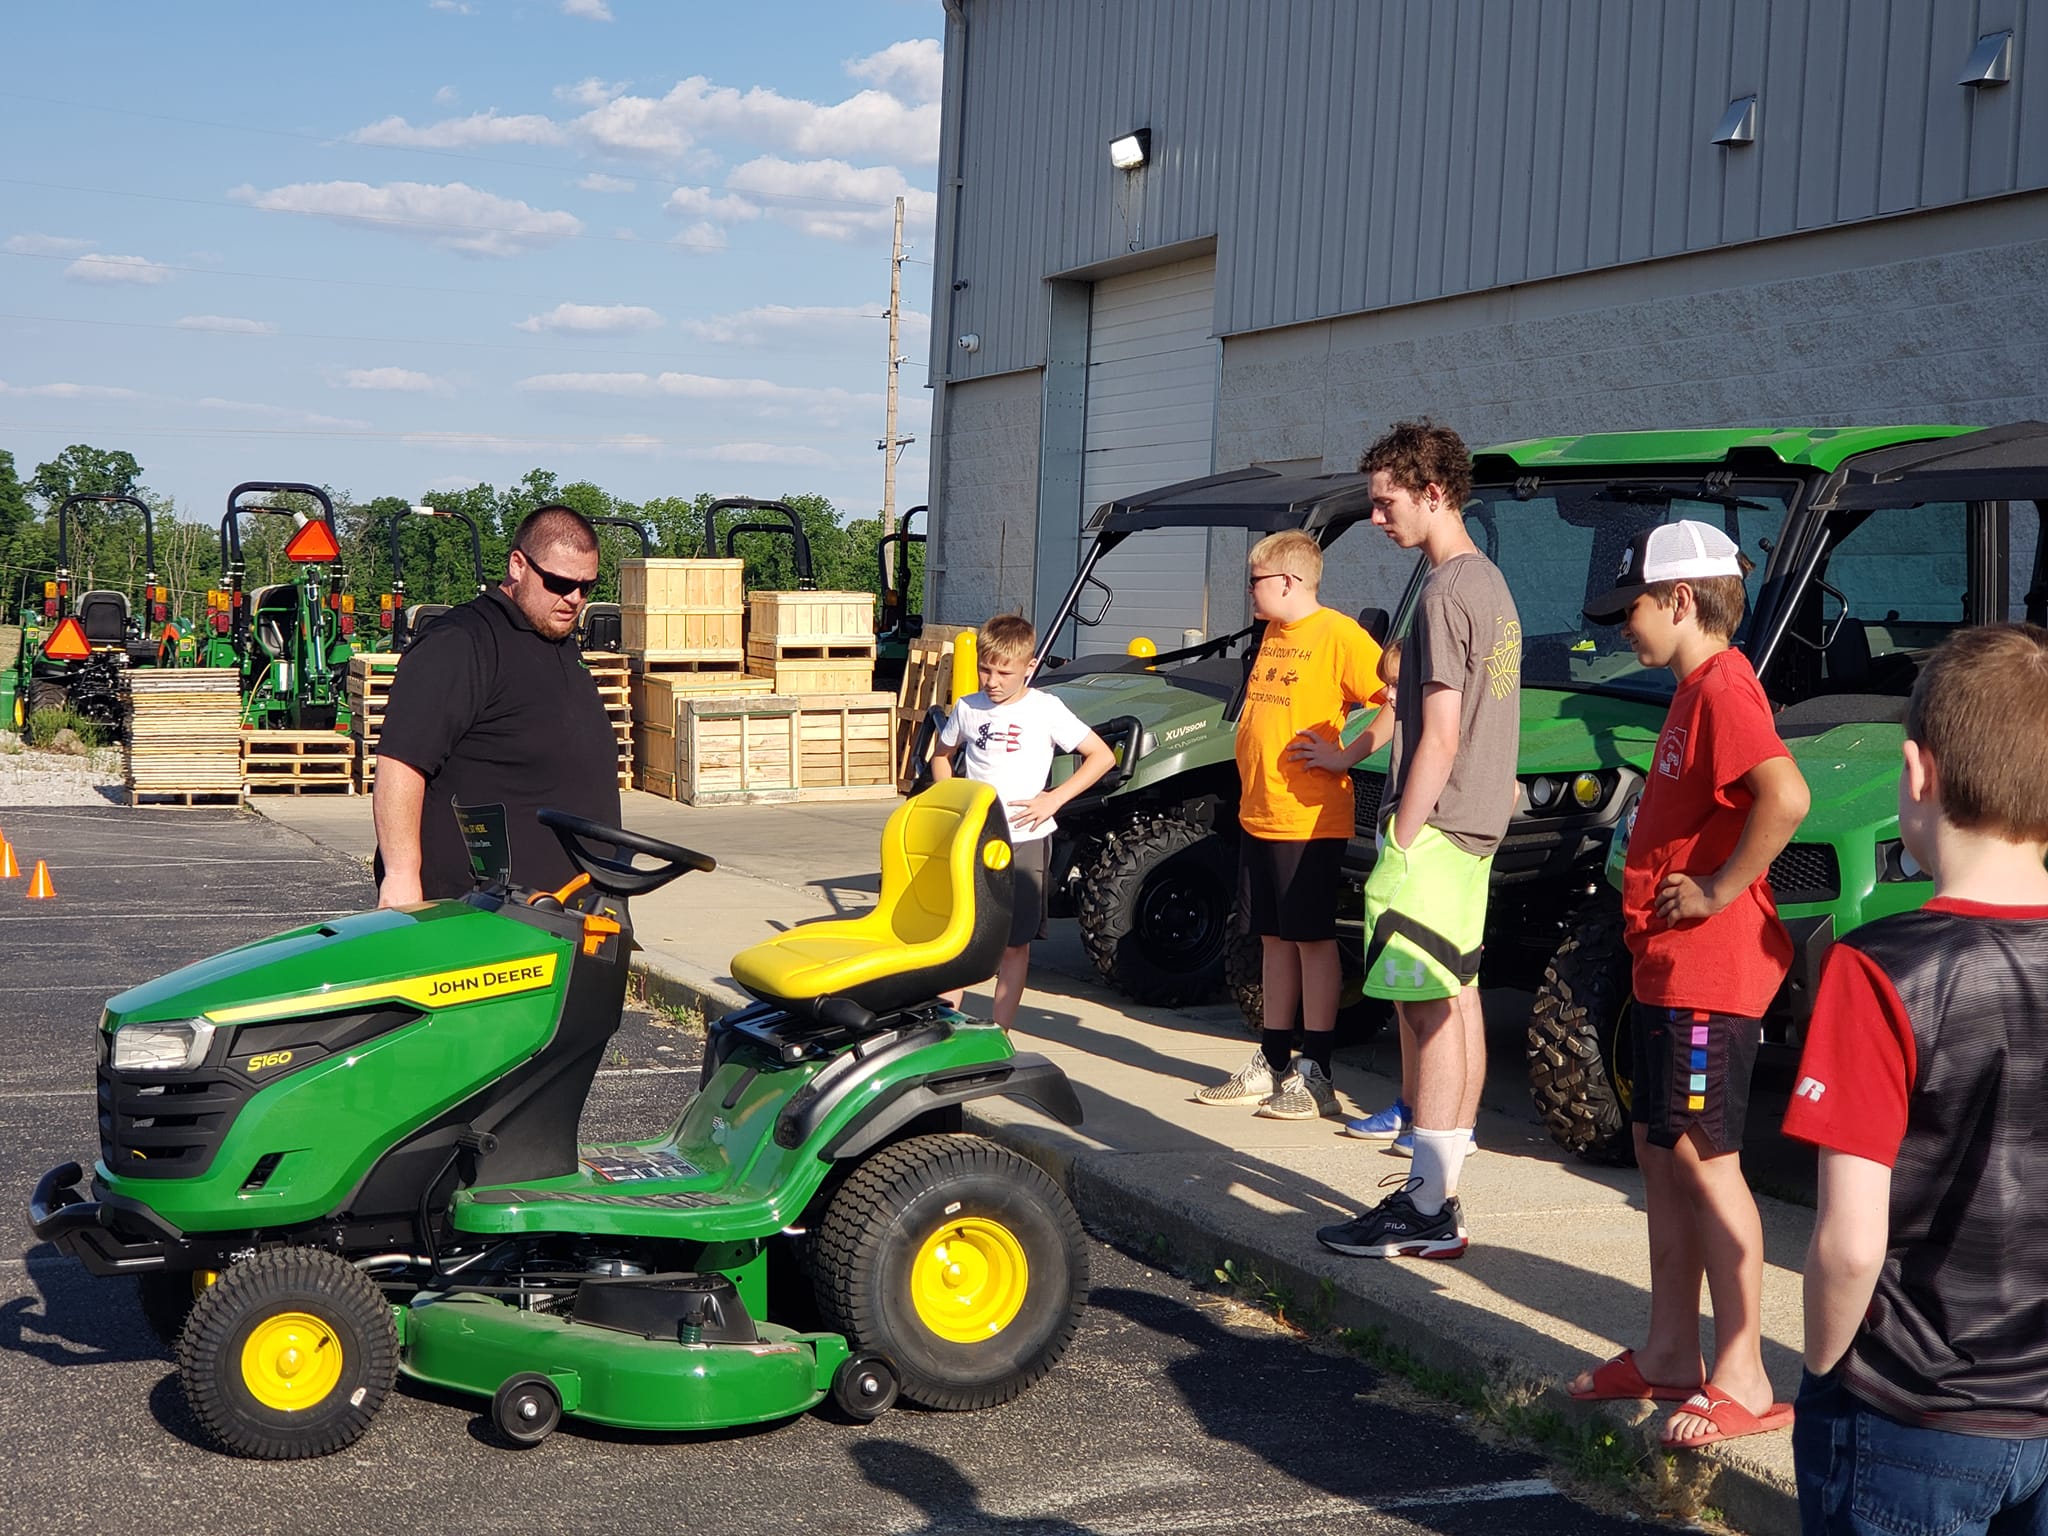 Tractor Club Members learning about a John Deere S160  Riding Lawn Mower